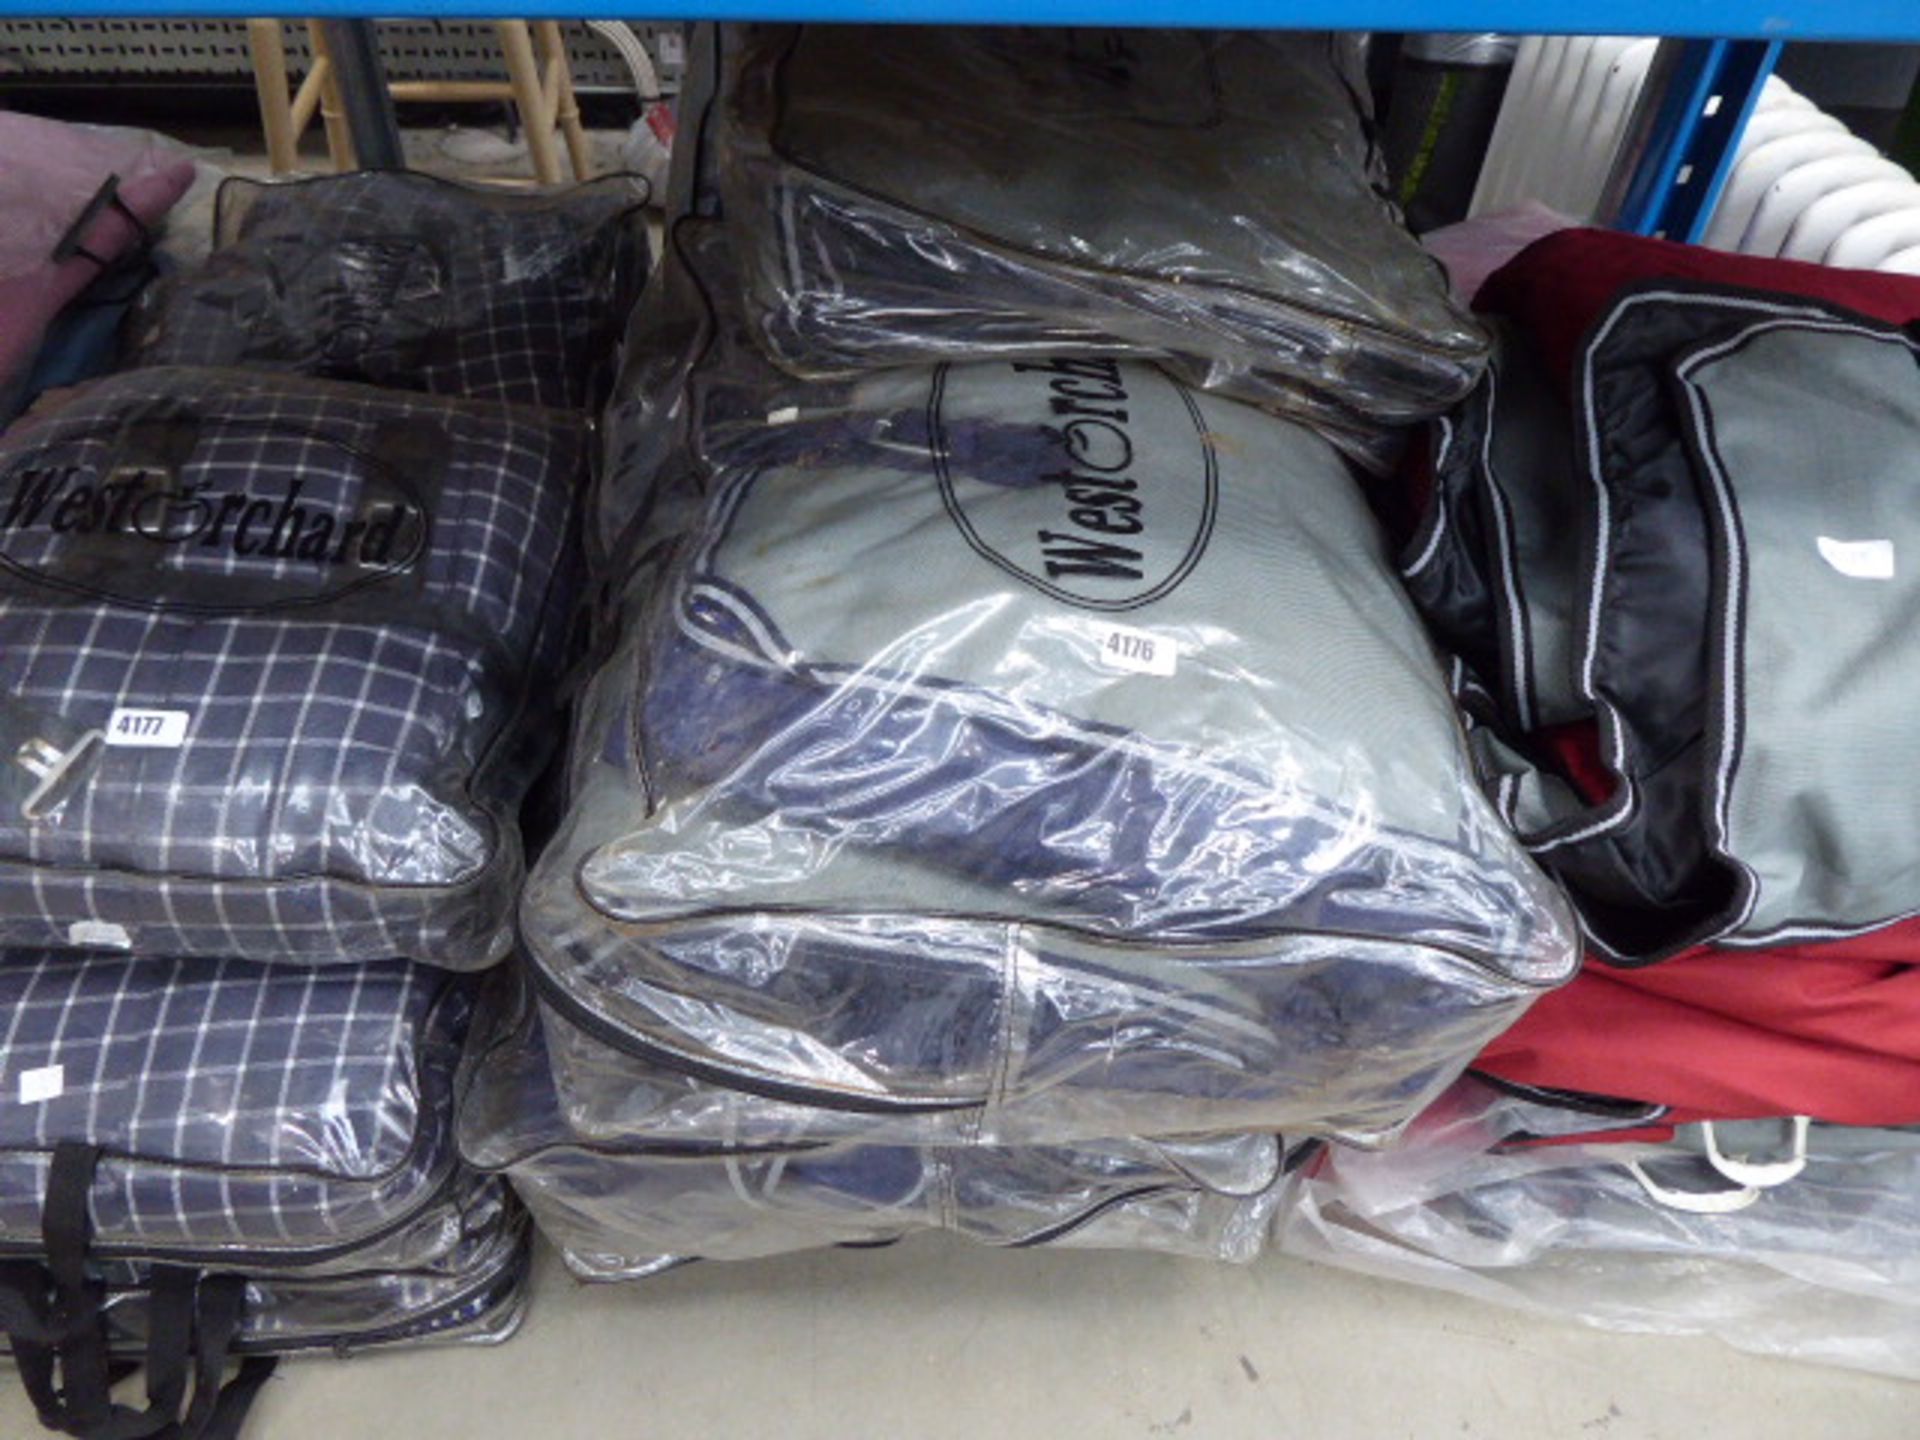 7 large grey and blue bagged horse blankets